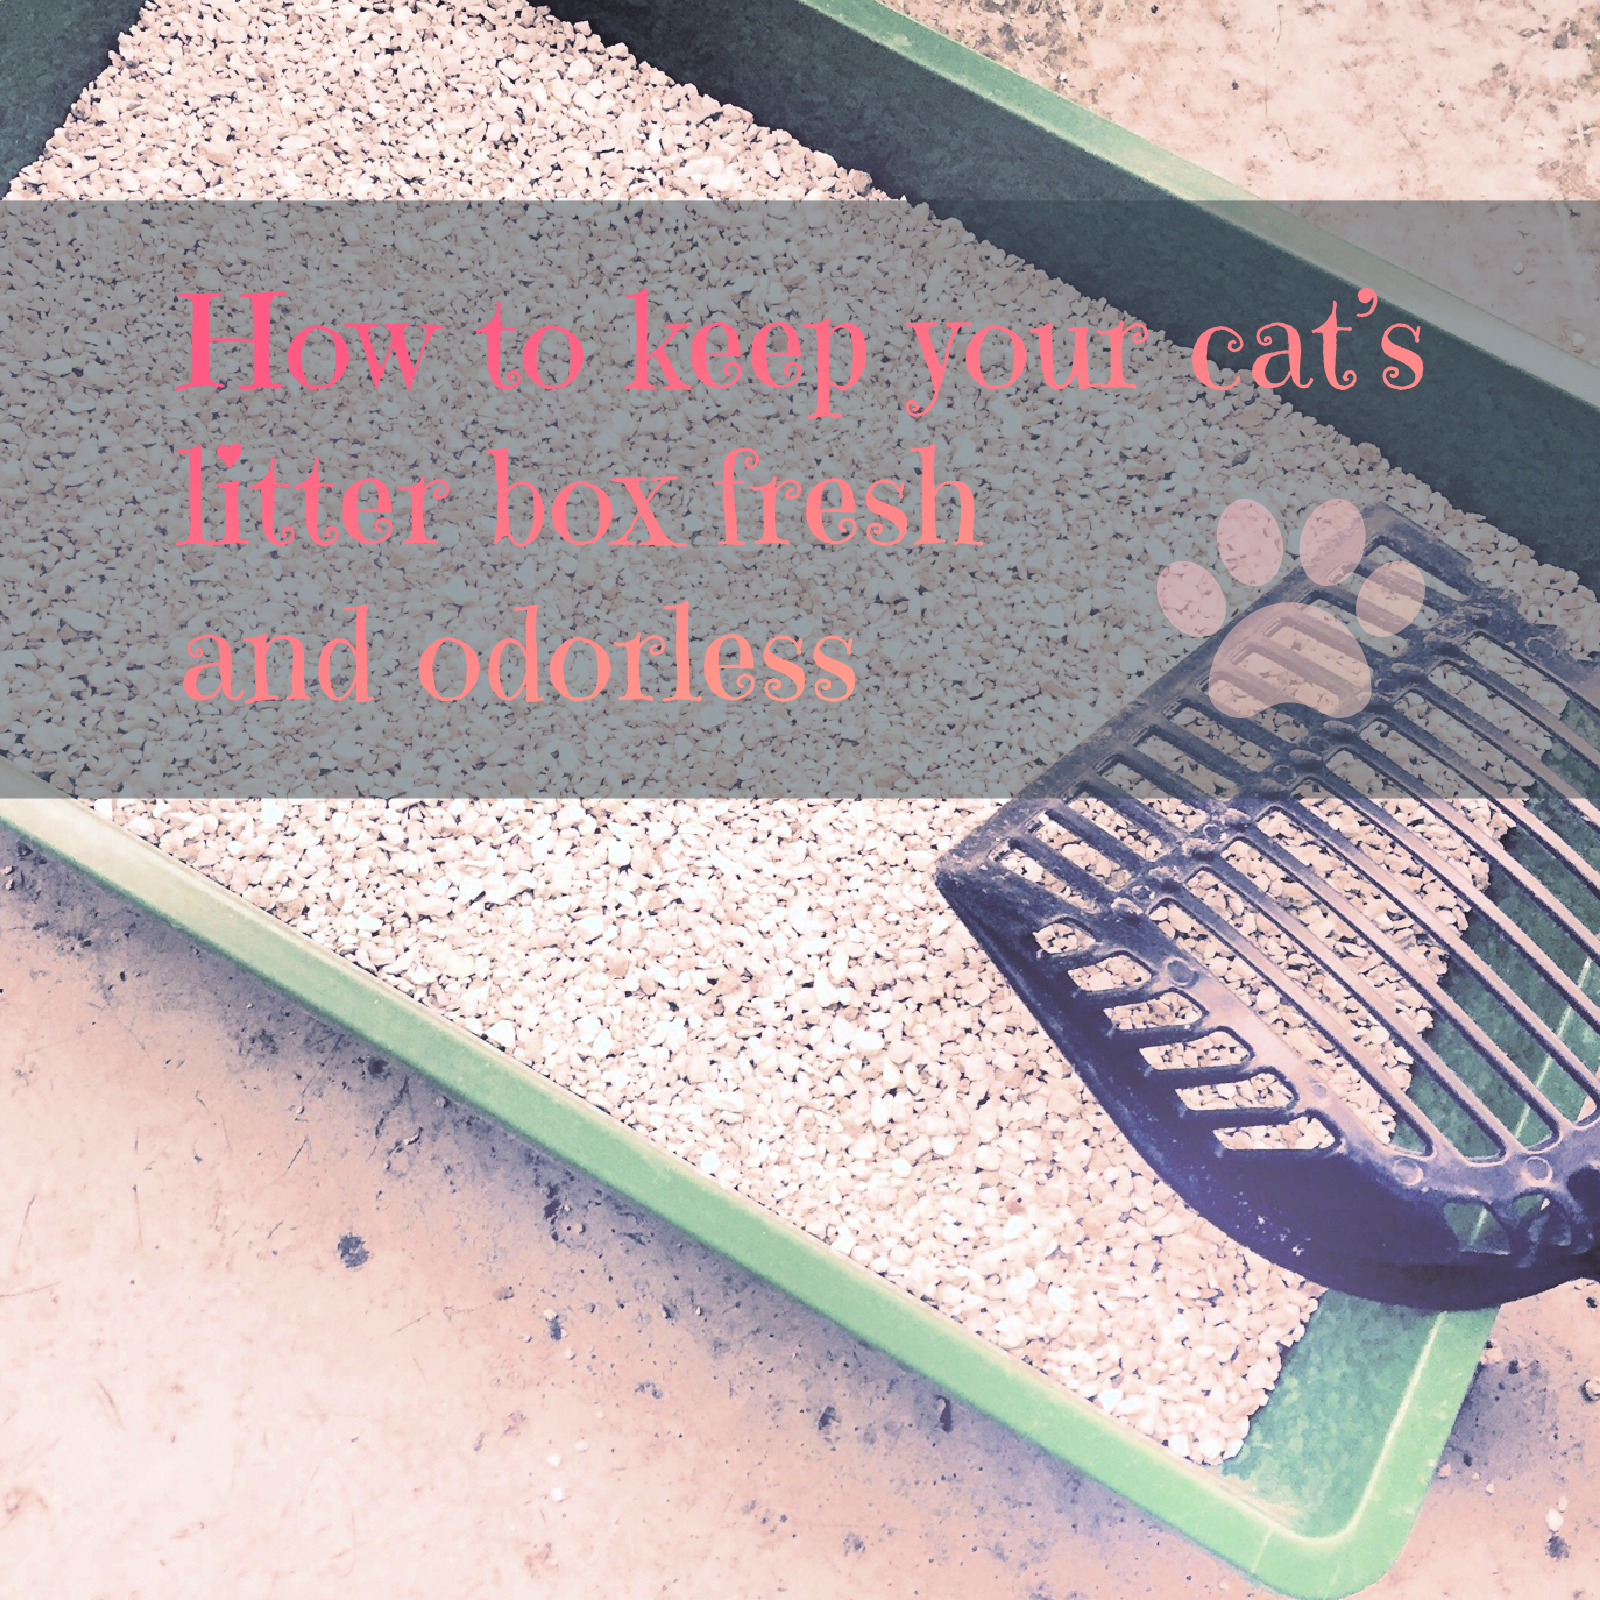 How to keep your cat’s litter box fresh and odorless | Sintra the Cat